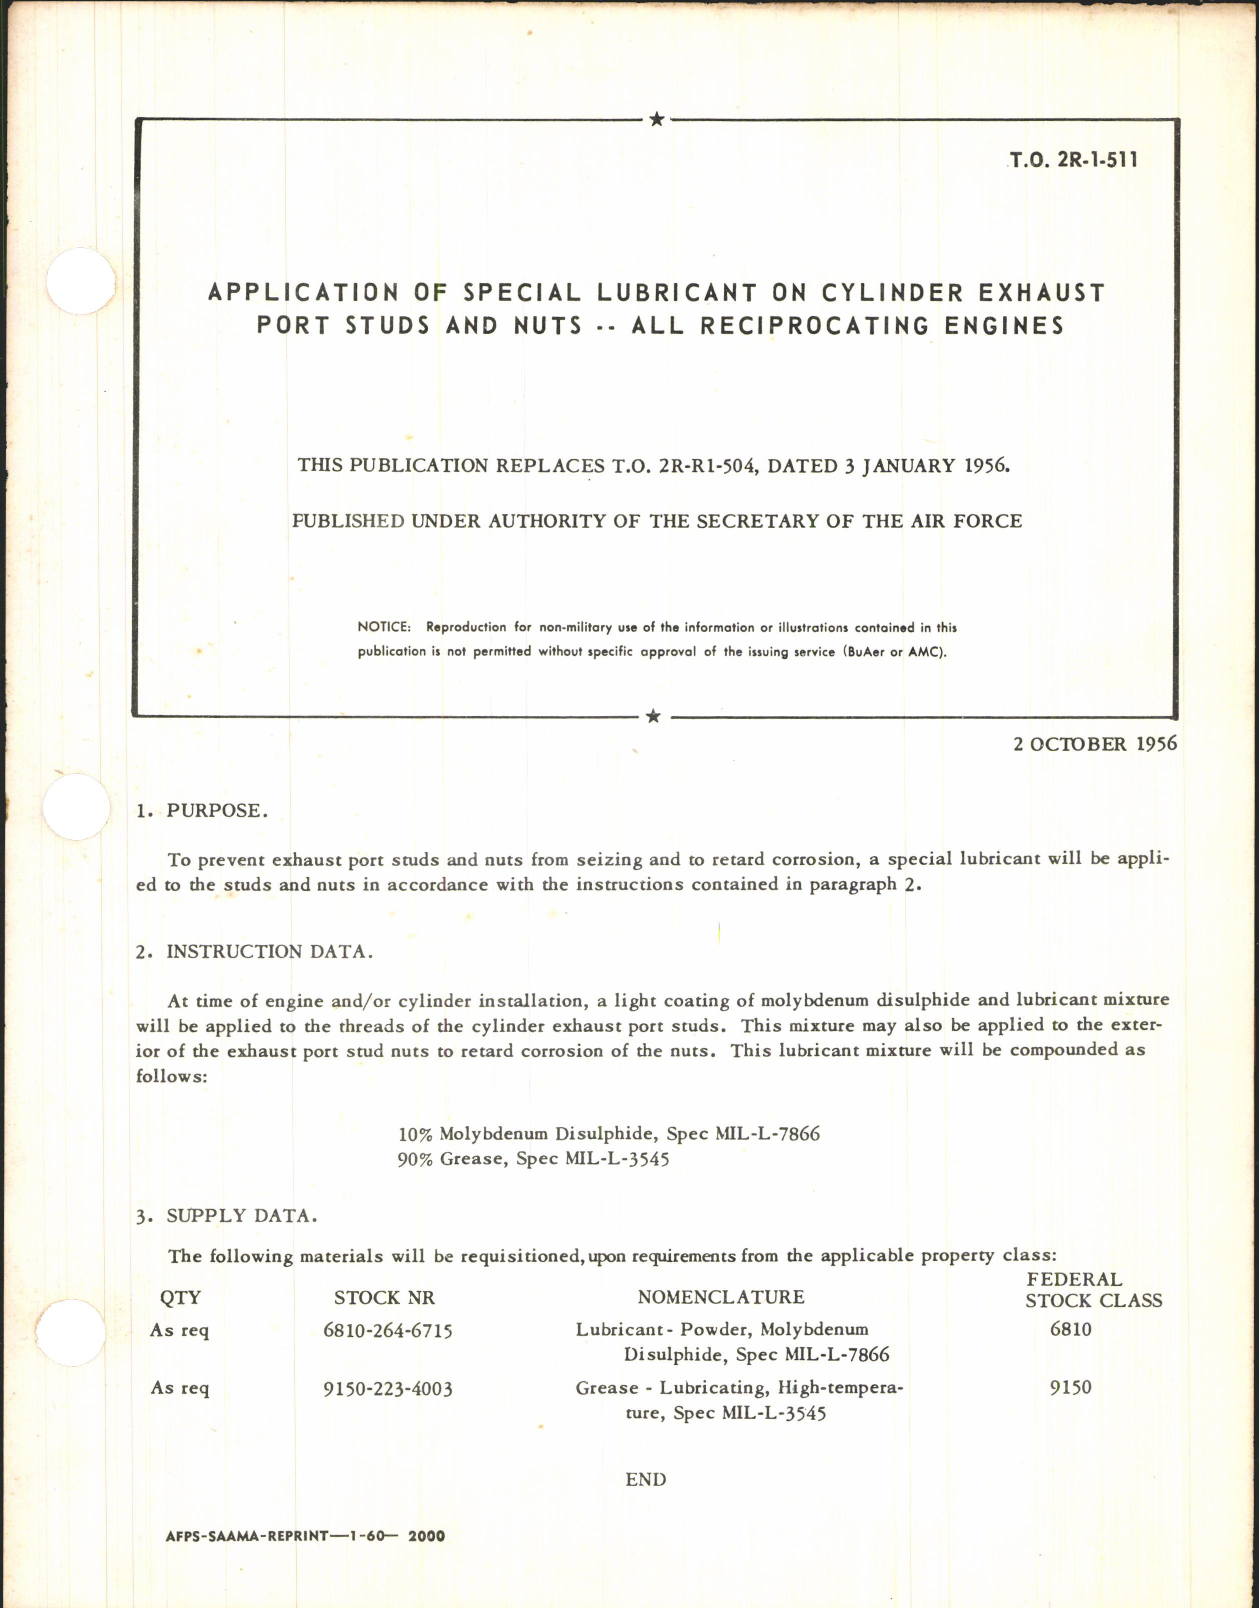 Sample page 1 from AirCorps Library document: Application of Special Lubricant on Cylinder Exhaust Port Studs and Nuts for All Reciprocating Engines